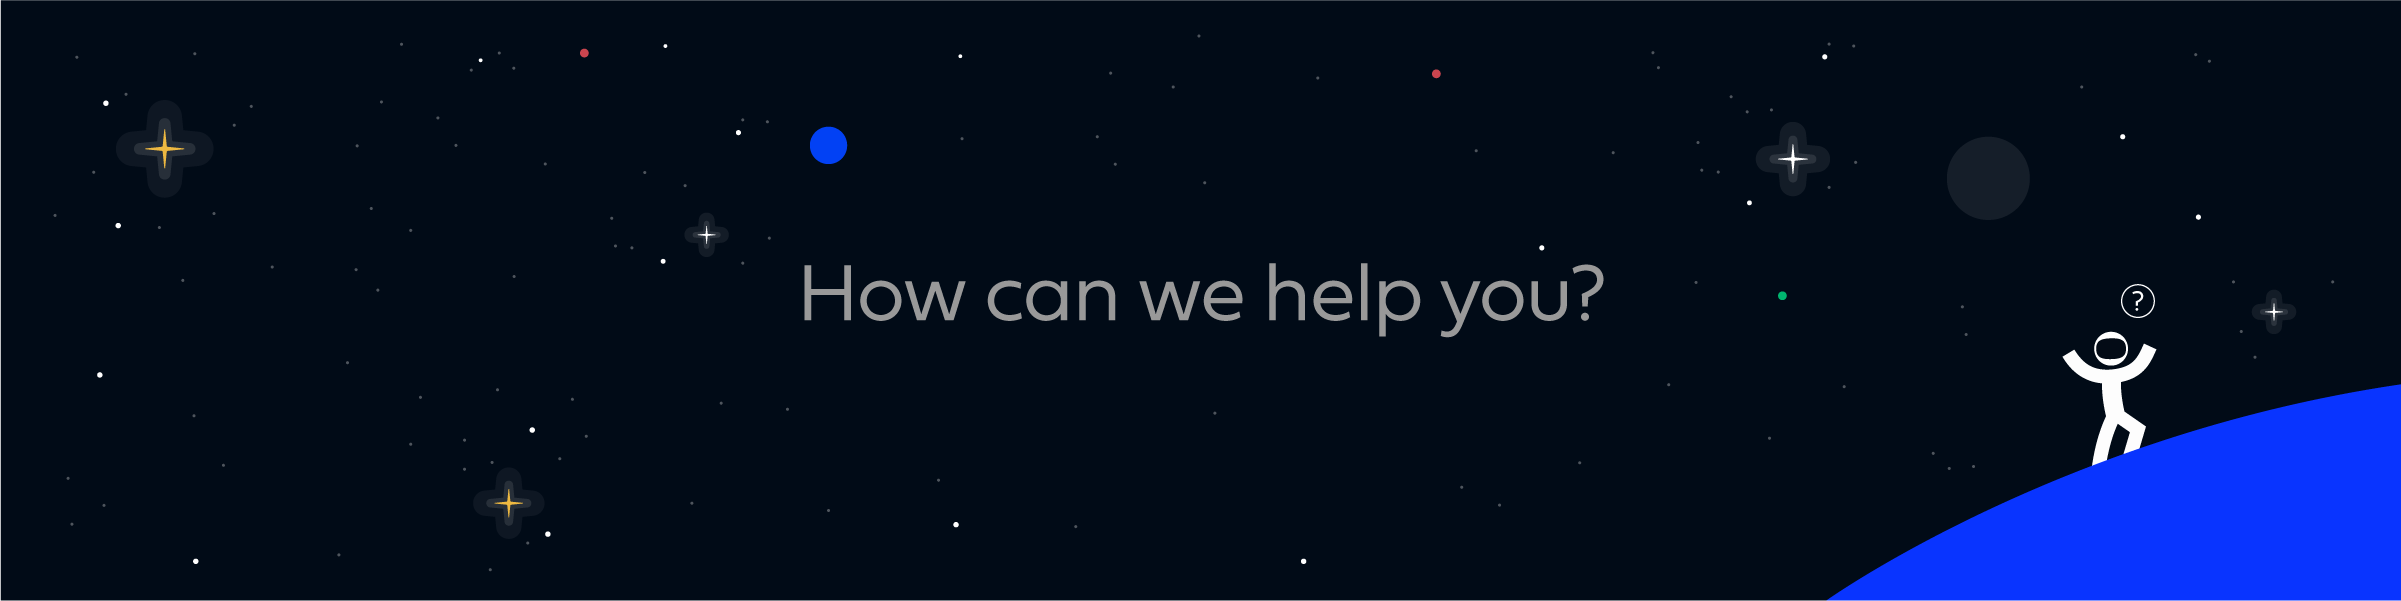 How can we help you